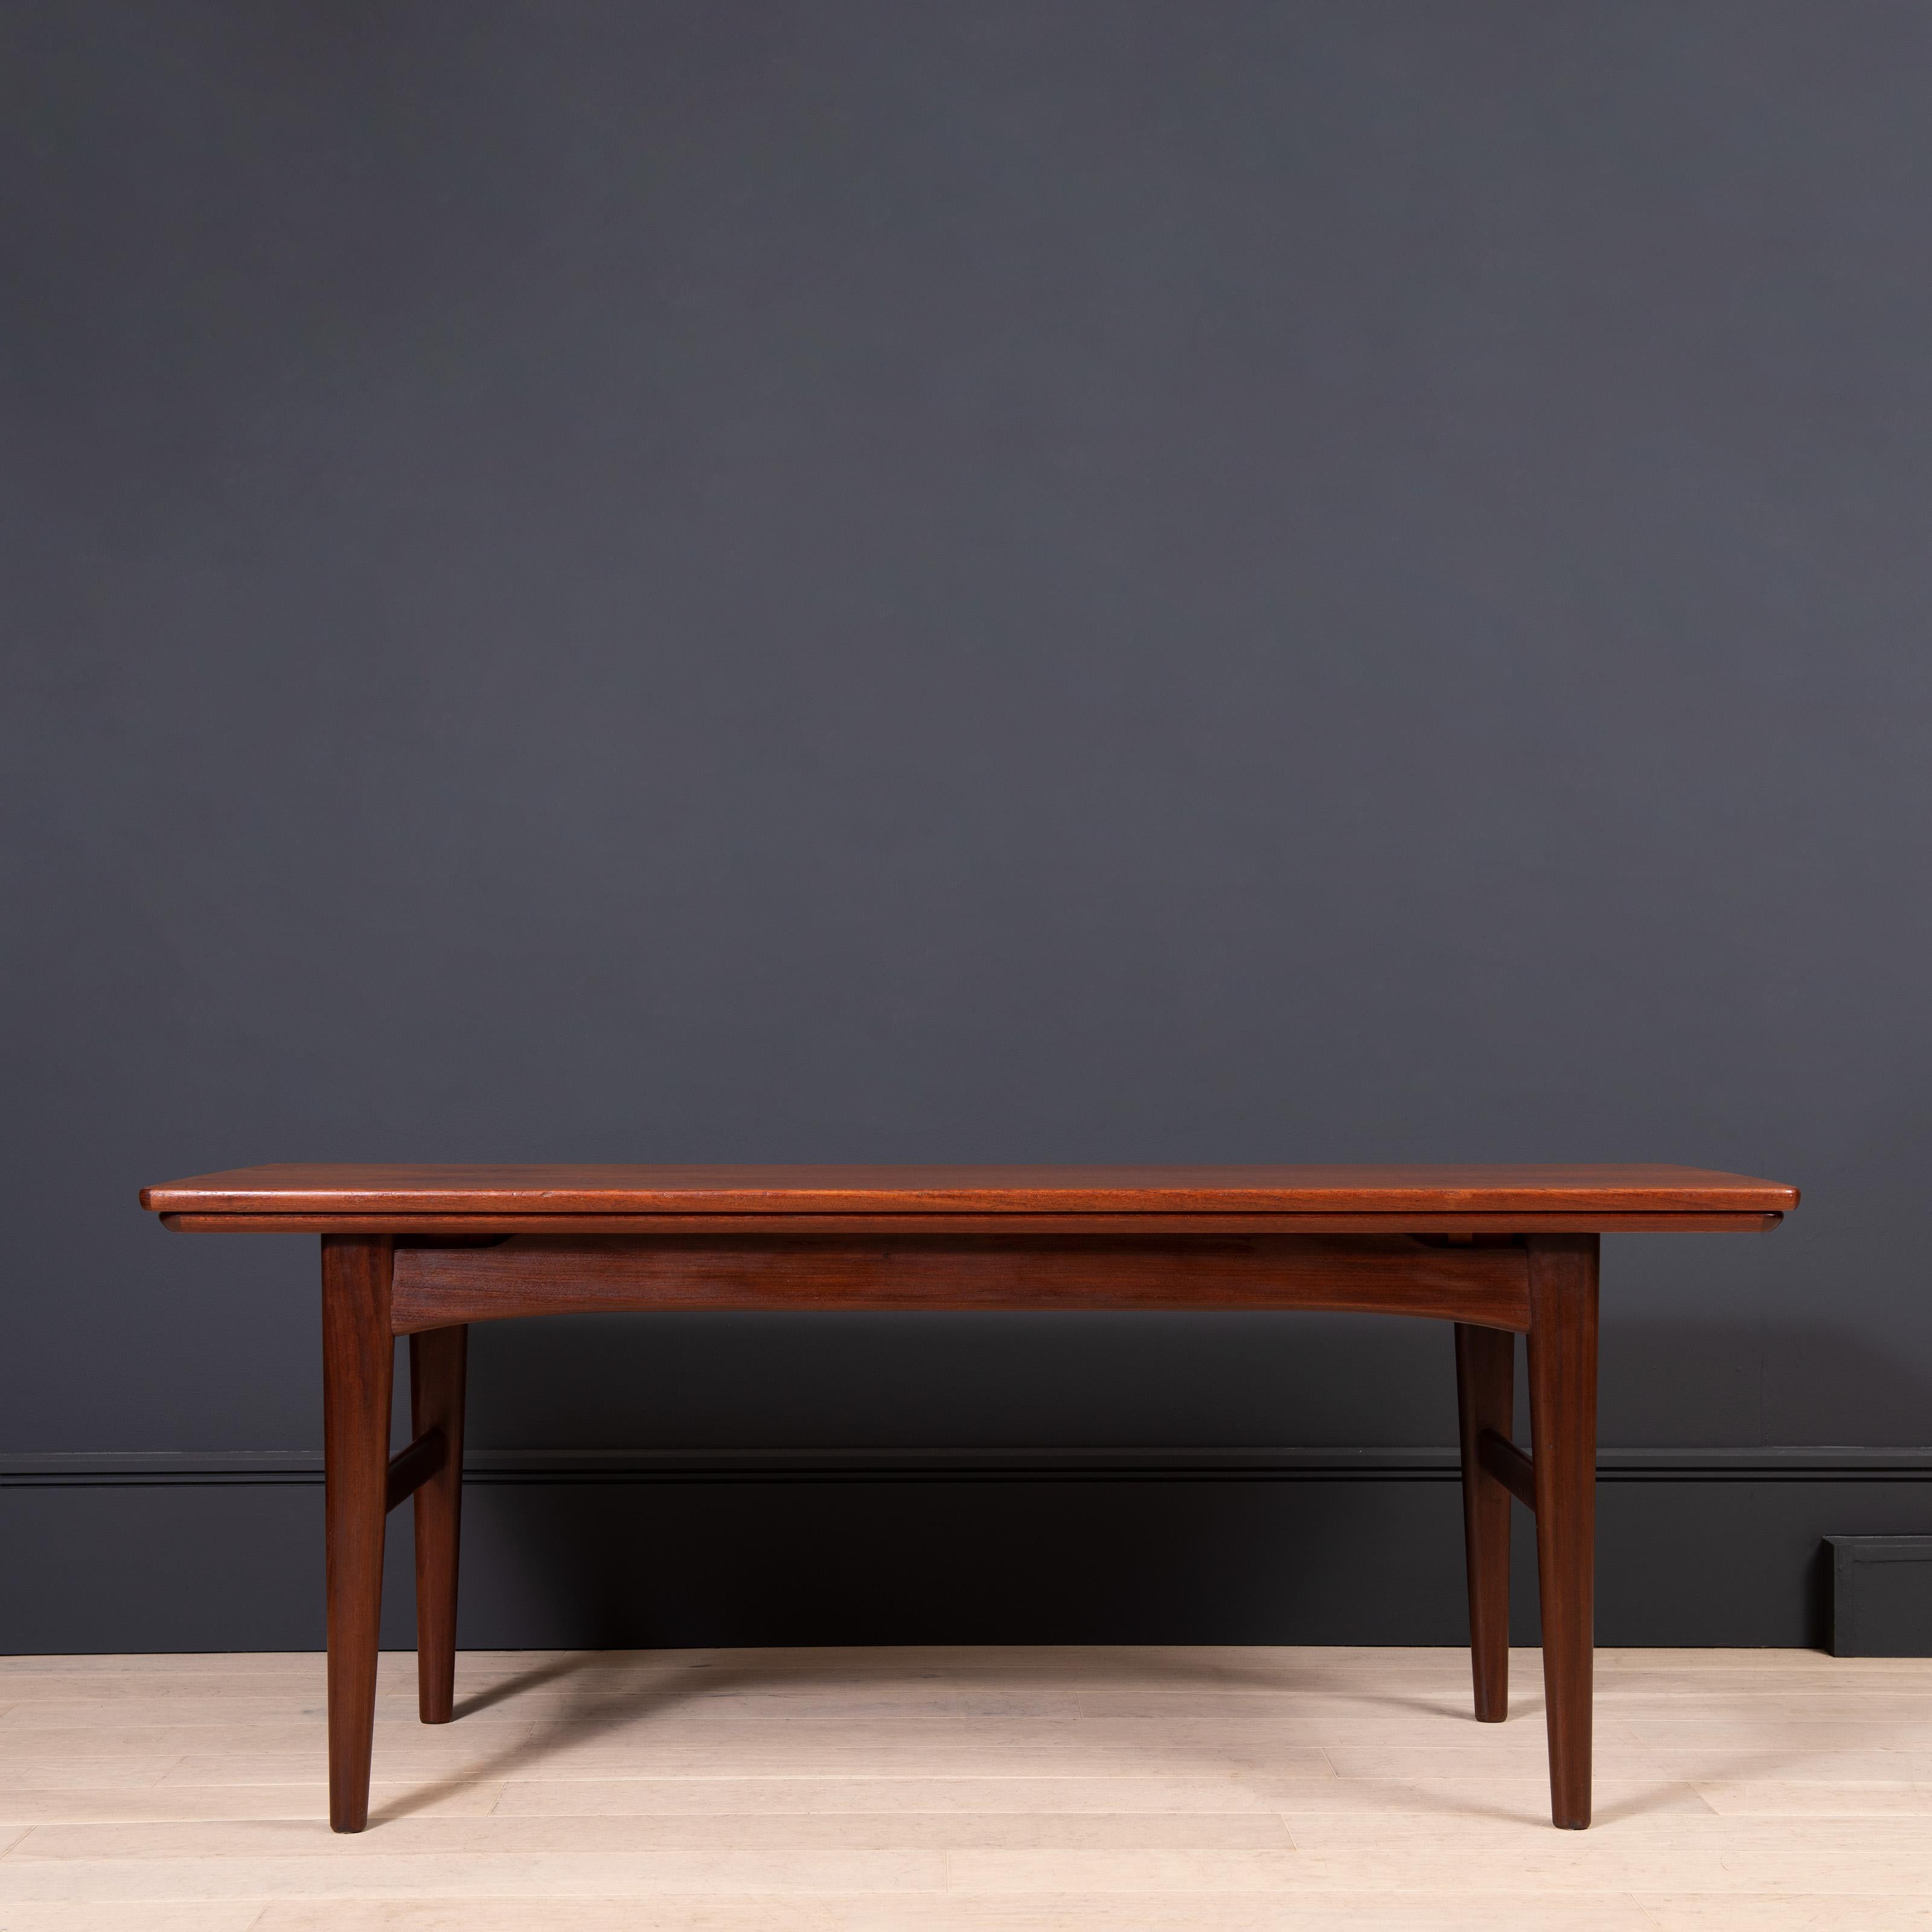 Innovative metamorphic table design from circa 1960. Wonderful coloured Teak. 
This clever design coverts from coffee/sofa table to a very practical dining table in a few simple moves. The table top has its extensions along the length rather than